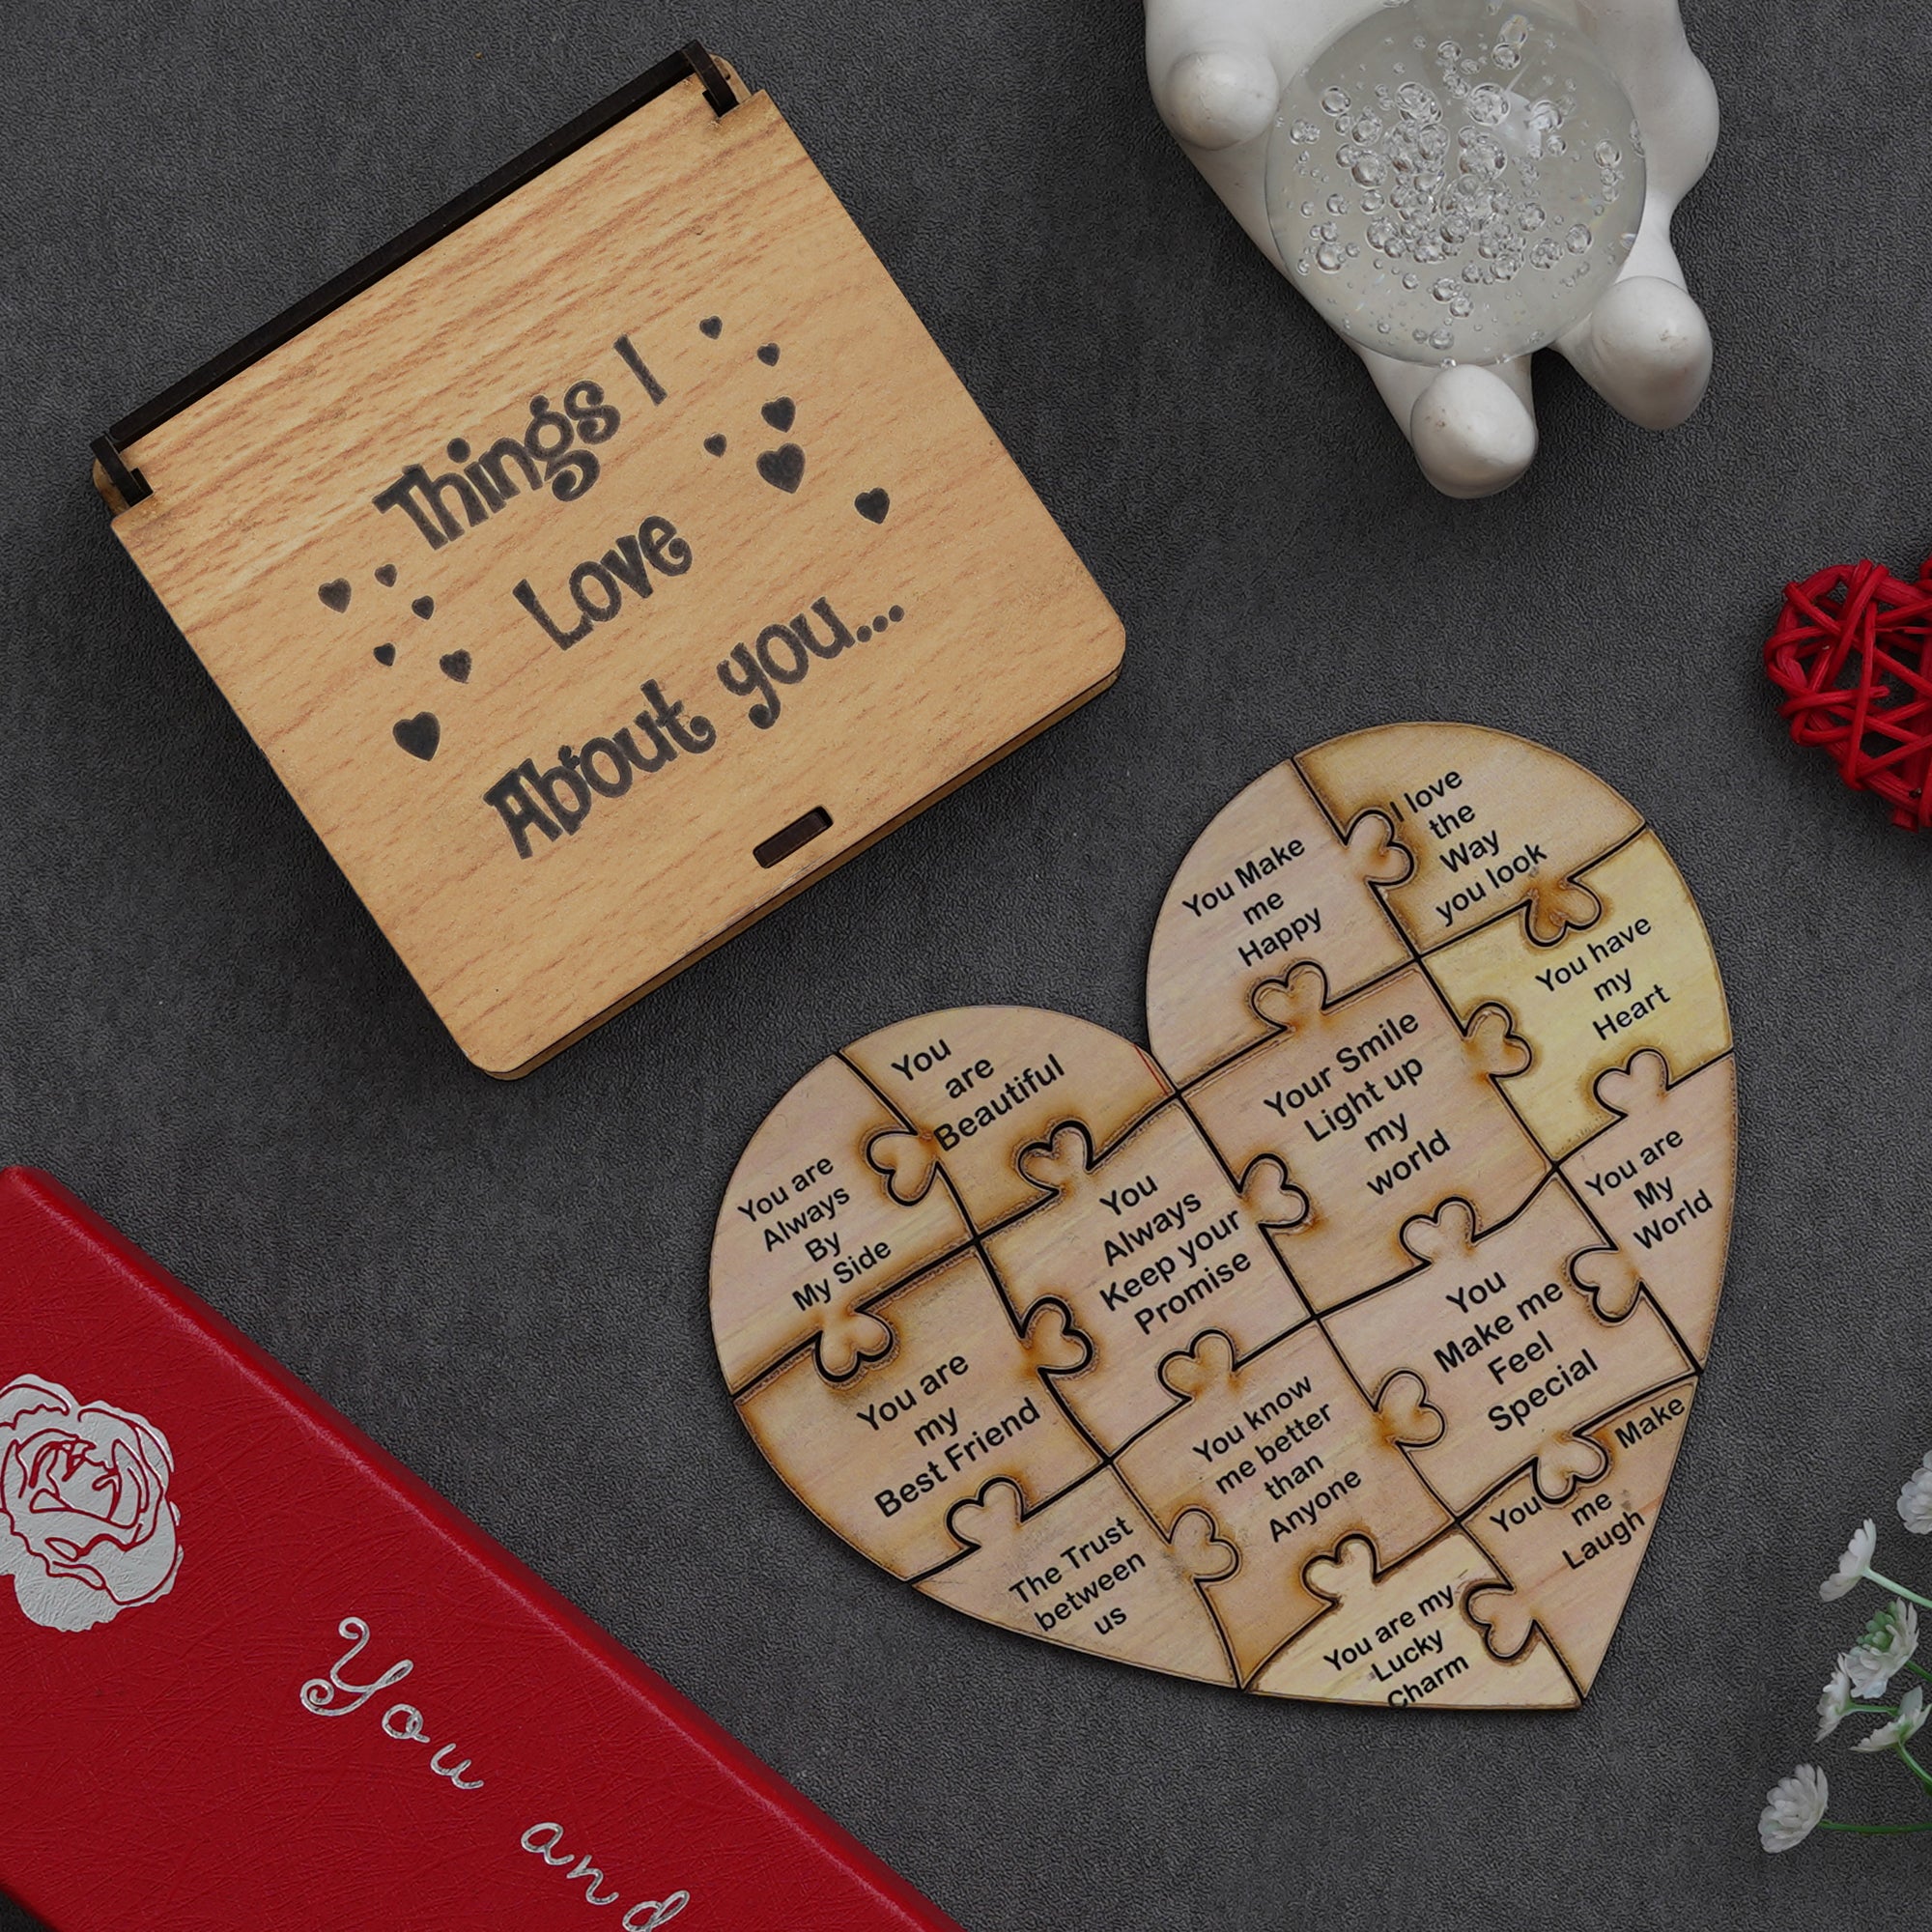 Valentine Combo of Pack of 8 Love Gift Cards, Red Gift Box with Teddy & Roses, "Things I Love About You" Puzzle Wooden Gift Set 5